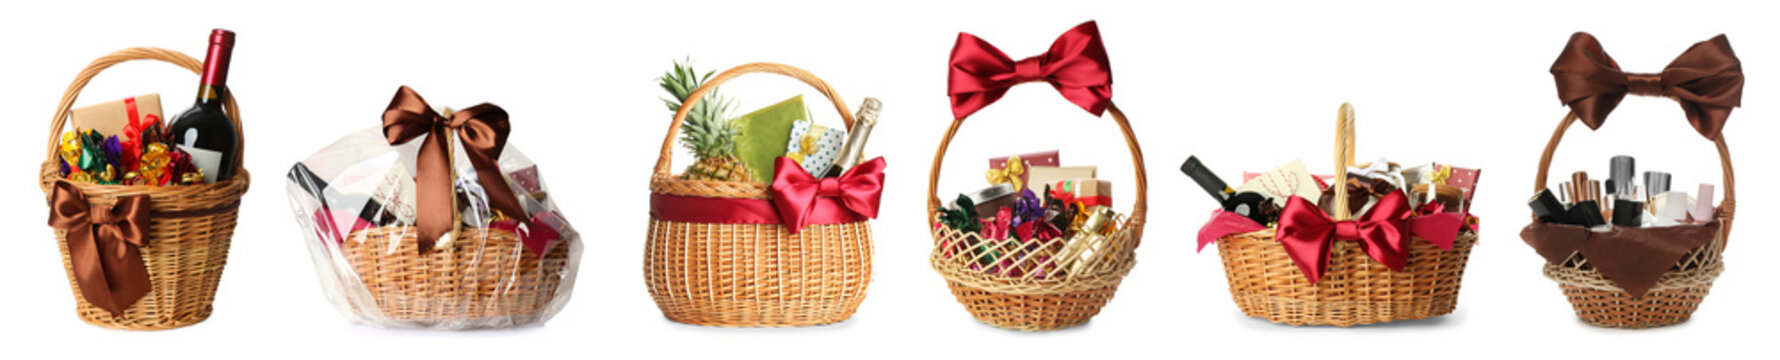 Set with wicker baskets full of different gifts on white background. Banner design